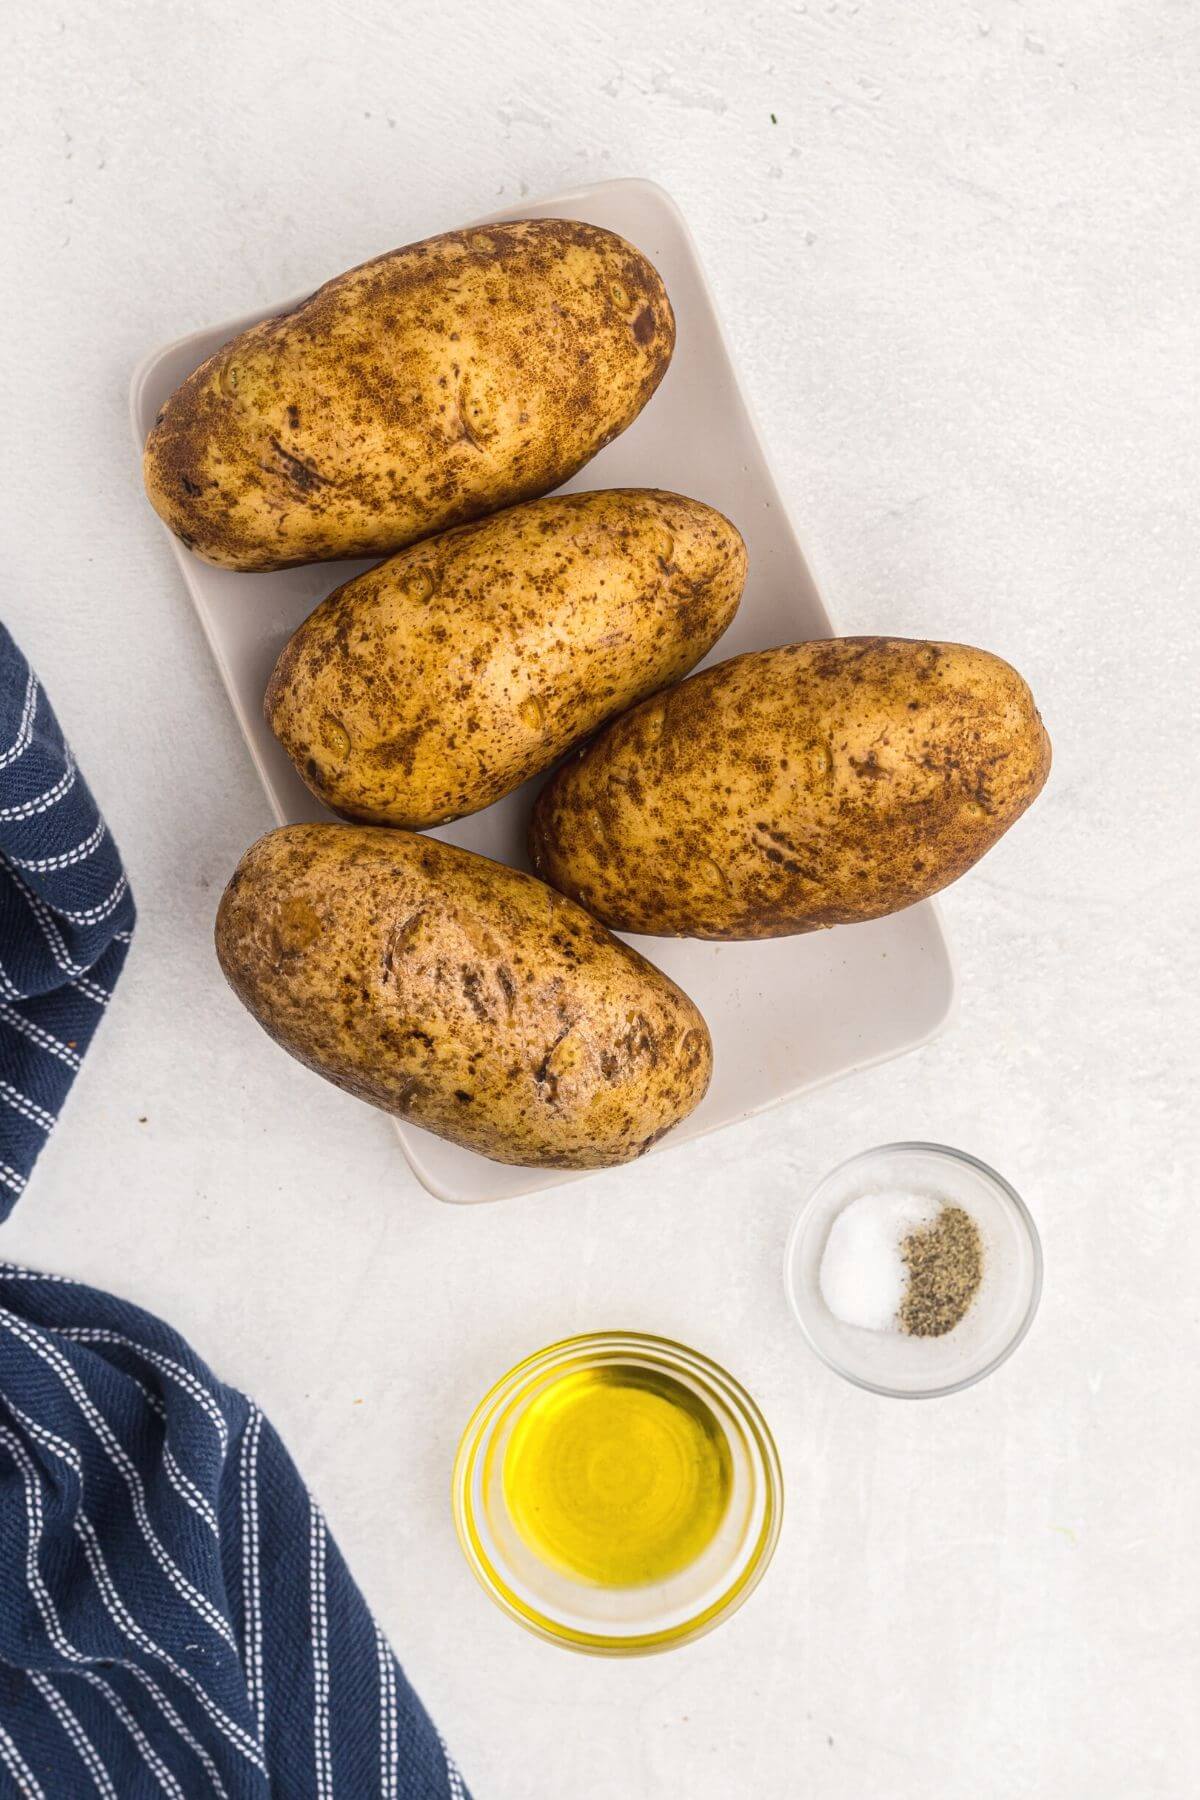 baked potatoes and oil and salt and pepper on a table.